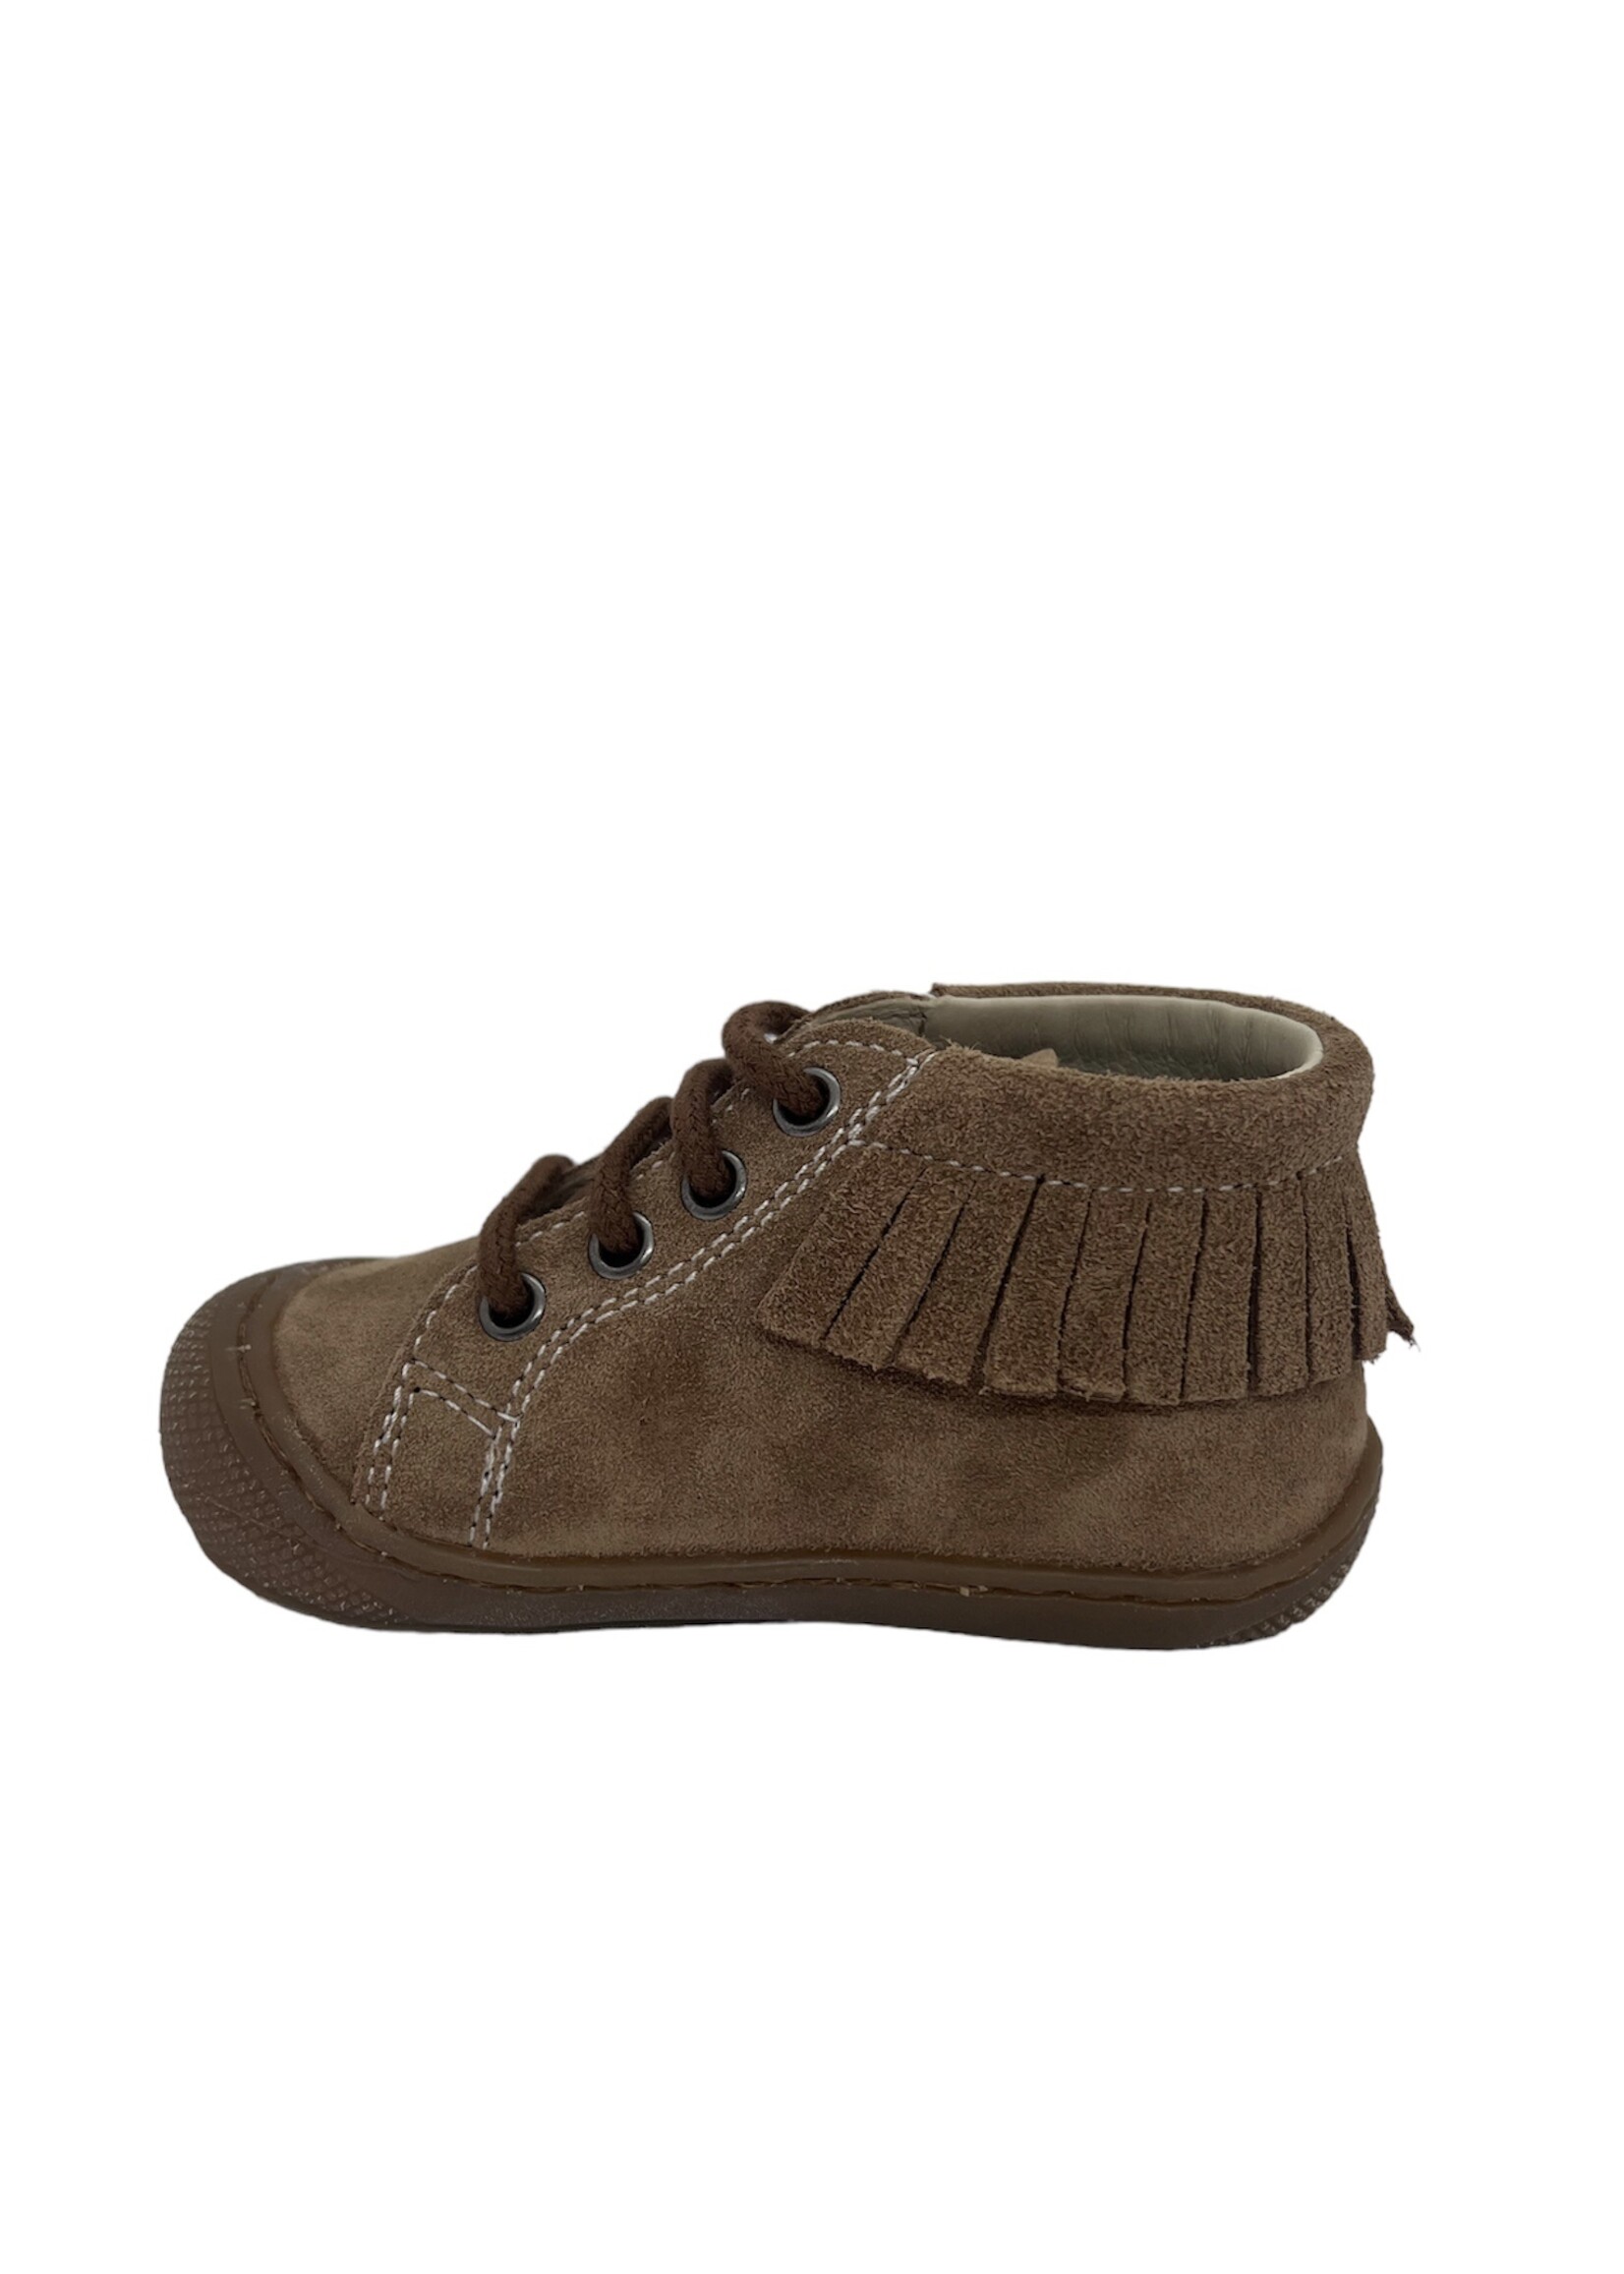 Naturino July one suede brown